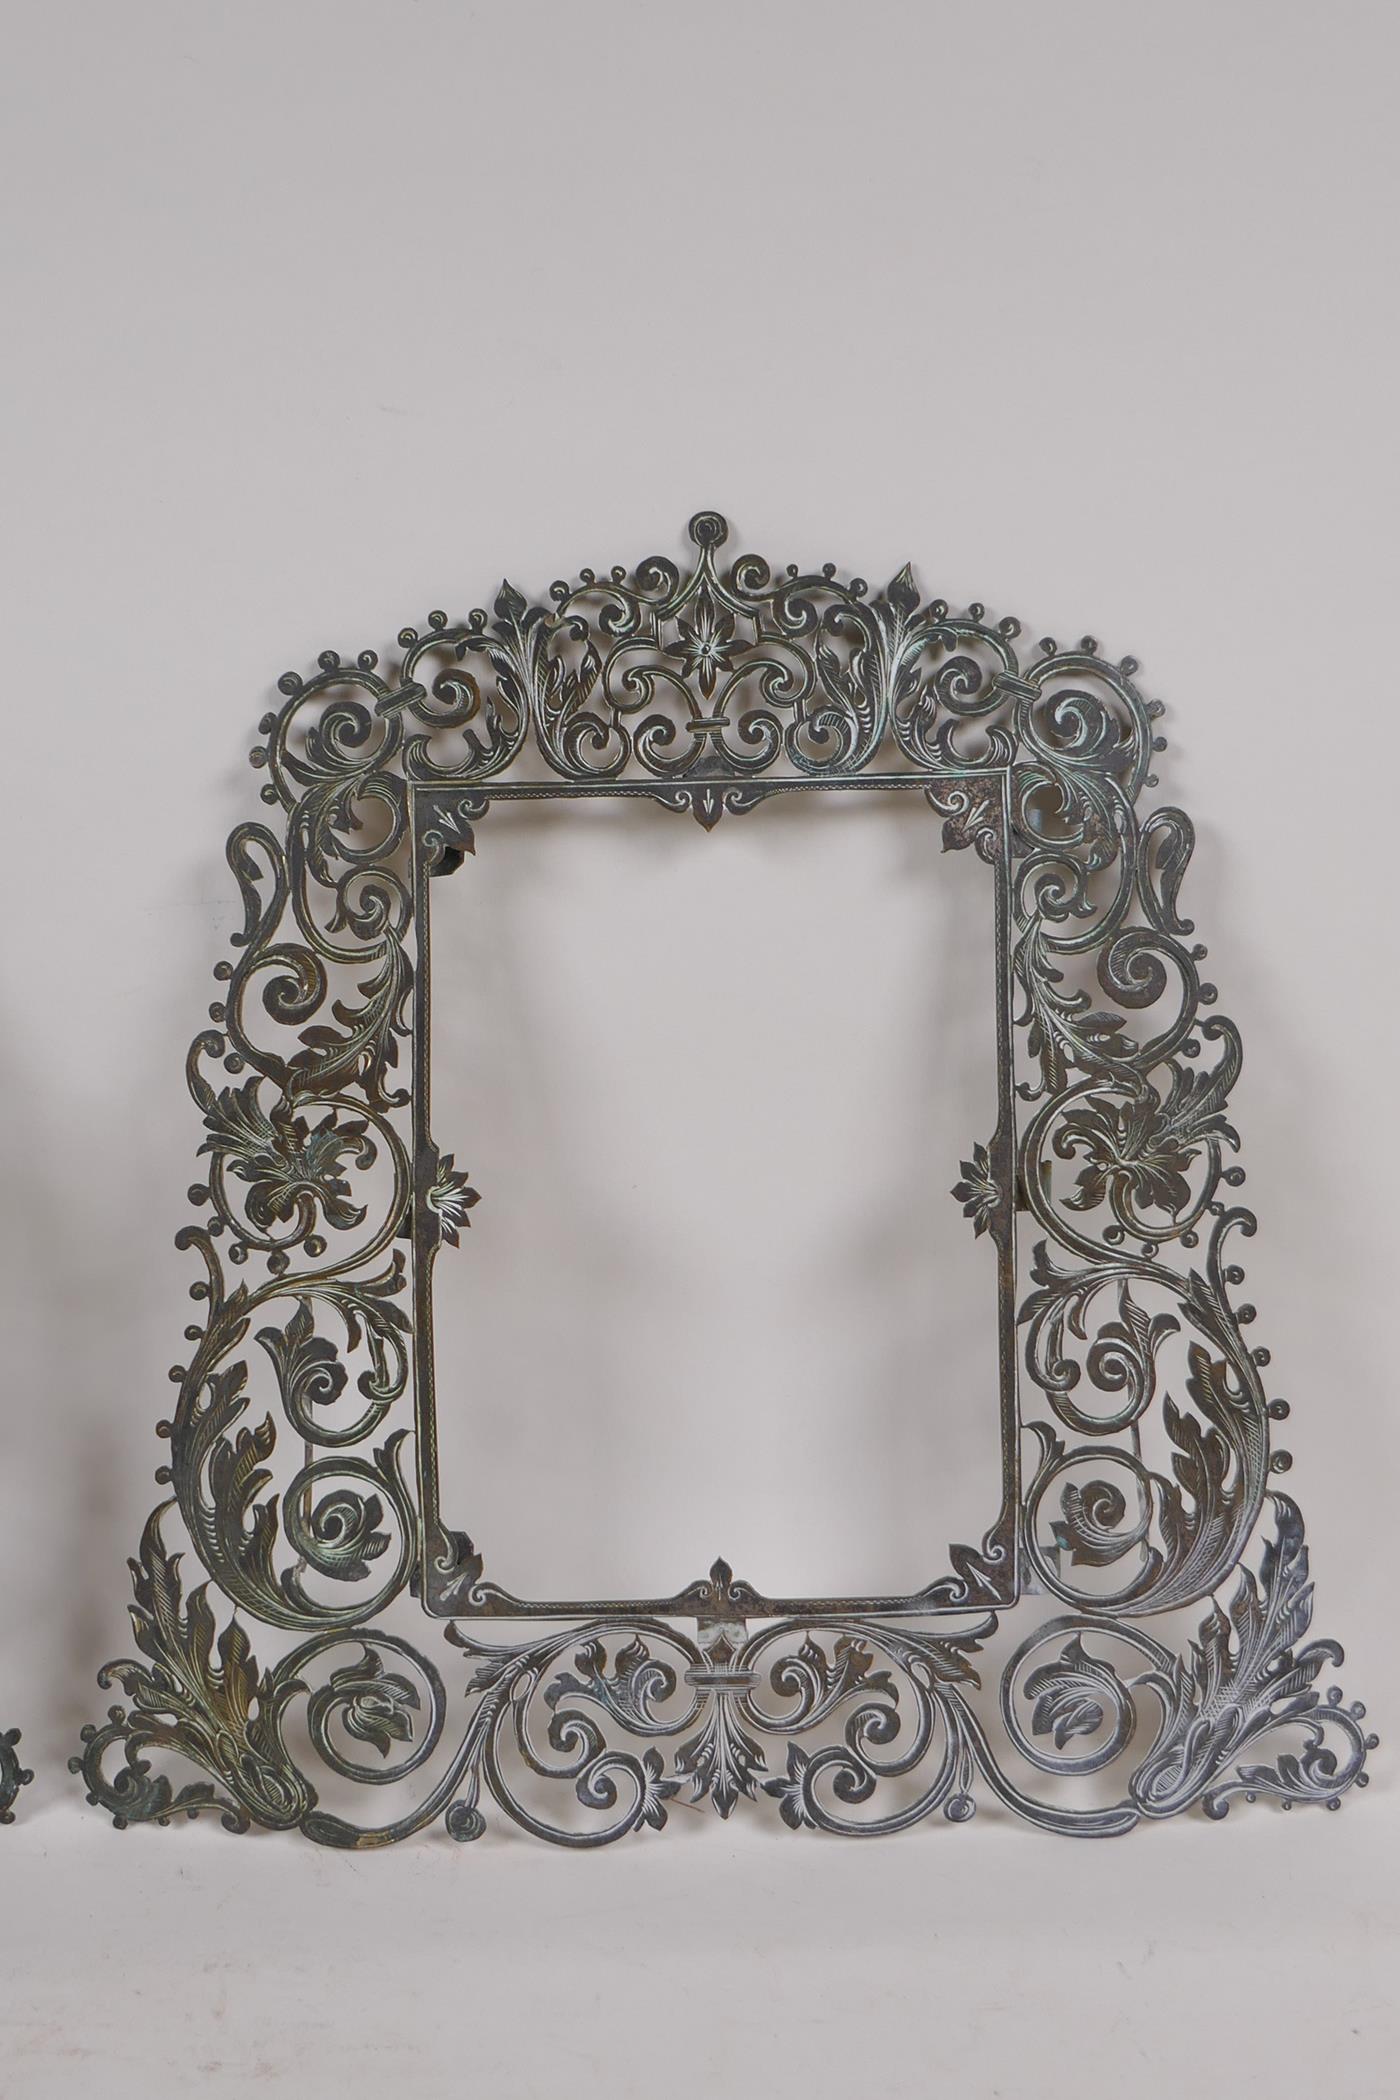 A pair of antique brass frames with pierced scrolling decoration, 23 x 23cm, rebate 10 x 14cm - Image 4 of 5